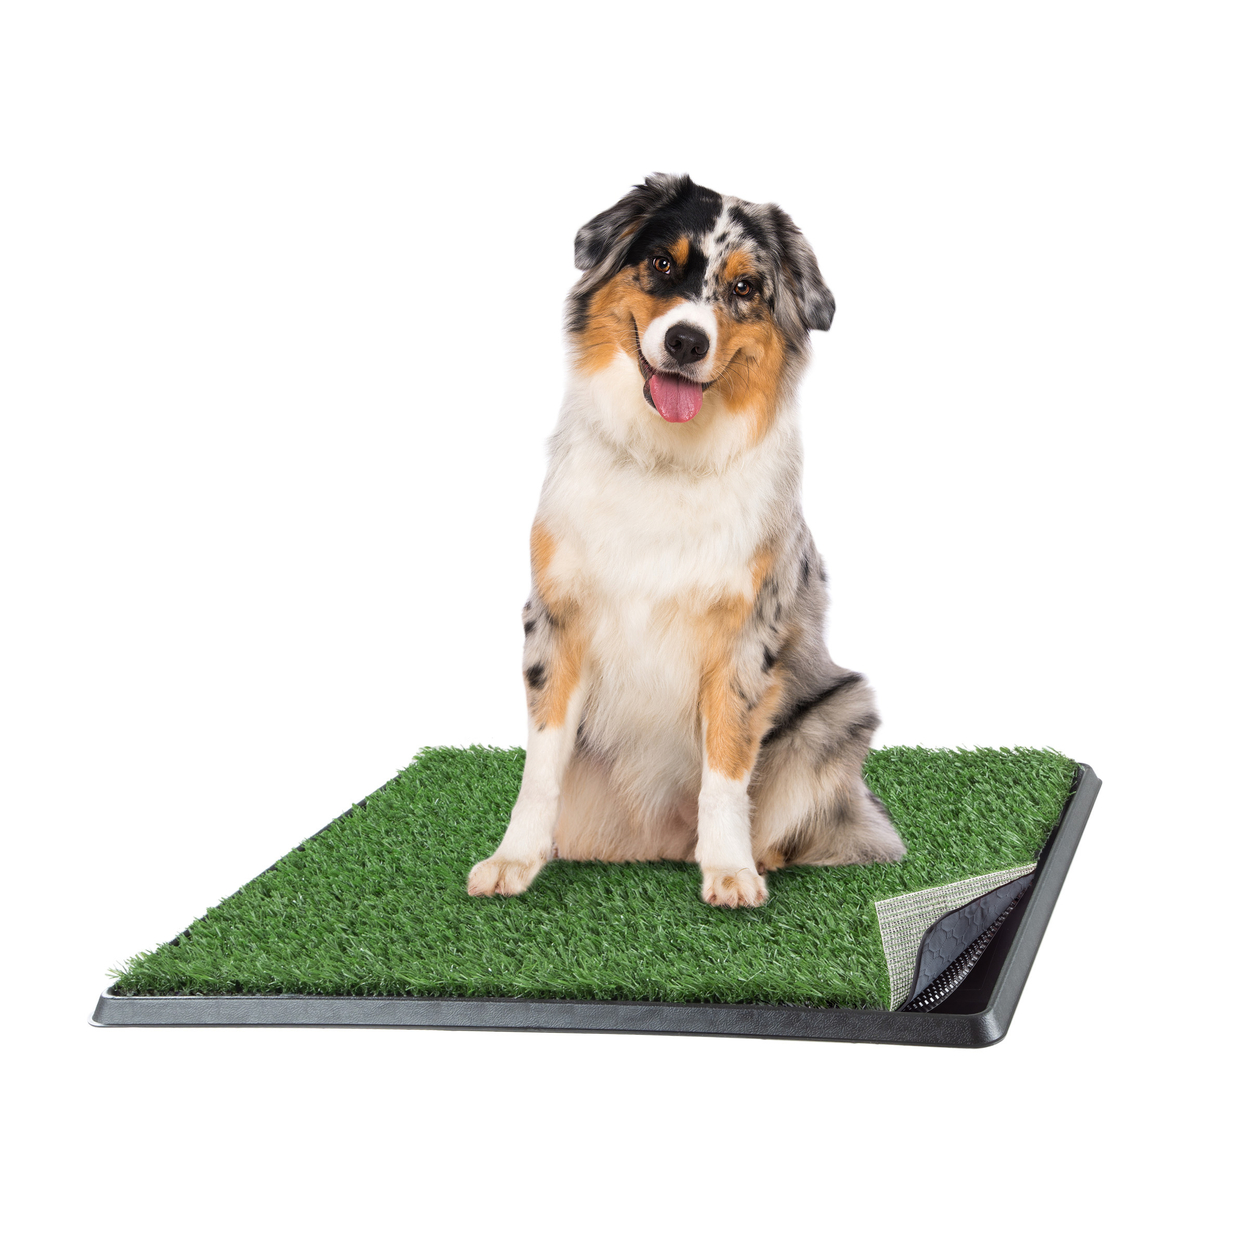 Artificial Grass Puppy Pee Pad Dogs 20x25 4-Layer Training Potty Pad With Tray